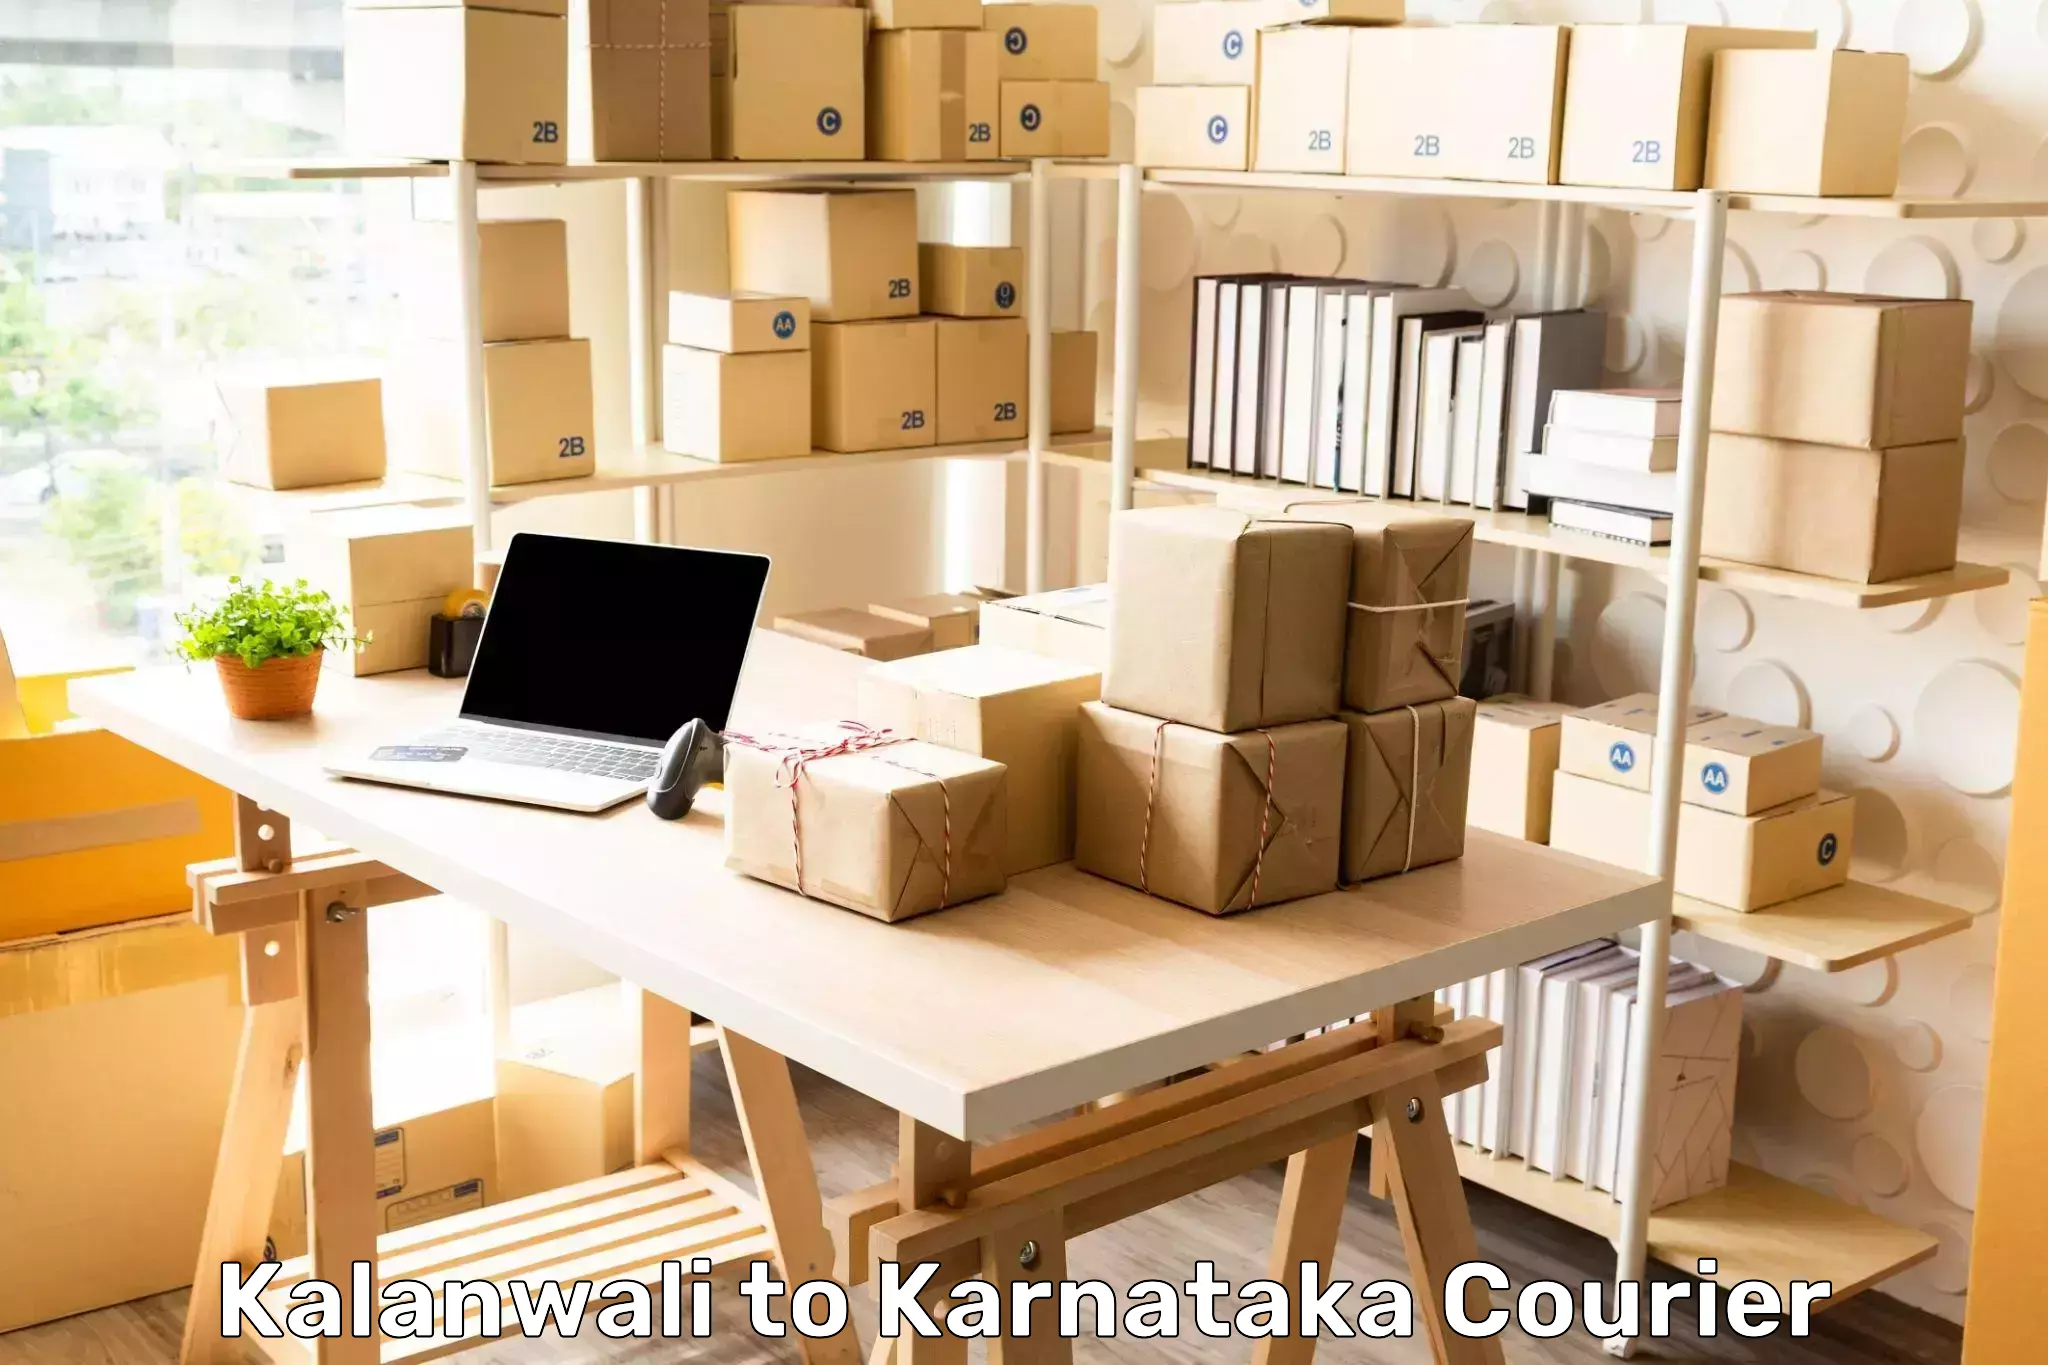 24/7 courier service Kalanwali to Davangere